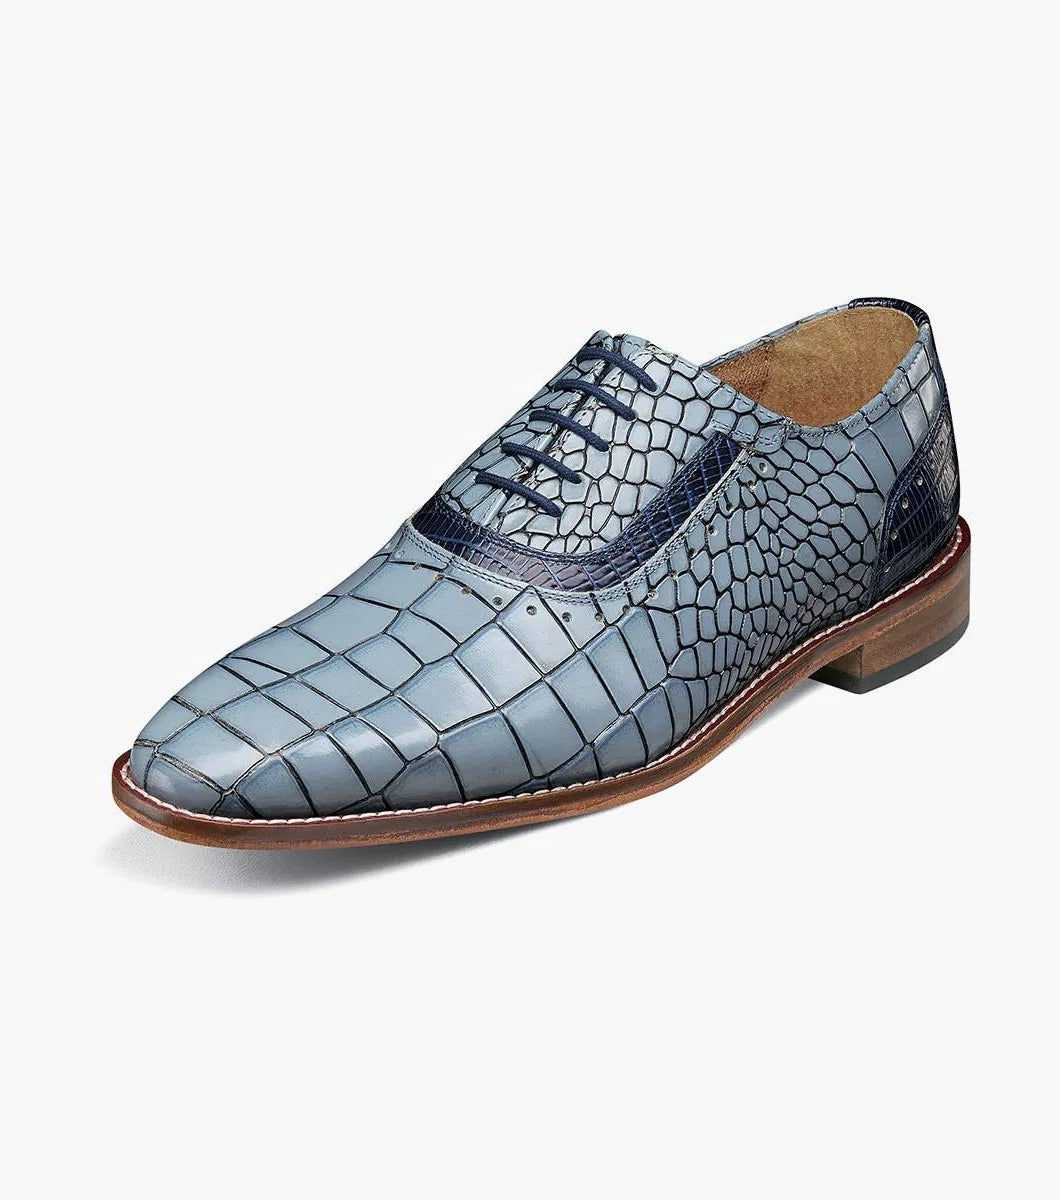 Stacy Adams RICCARDI Plain Toe Oxford Color: Light Blue Multi Available in Sizes 11.5 & 12